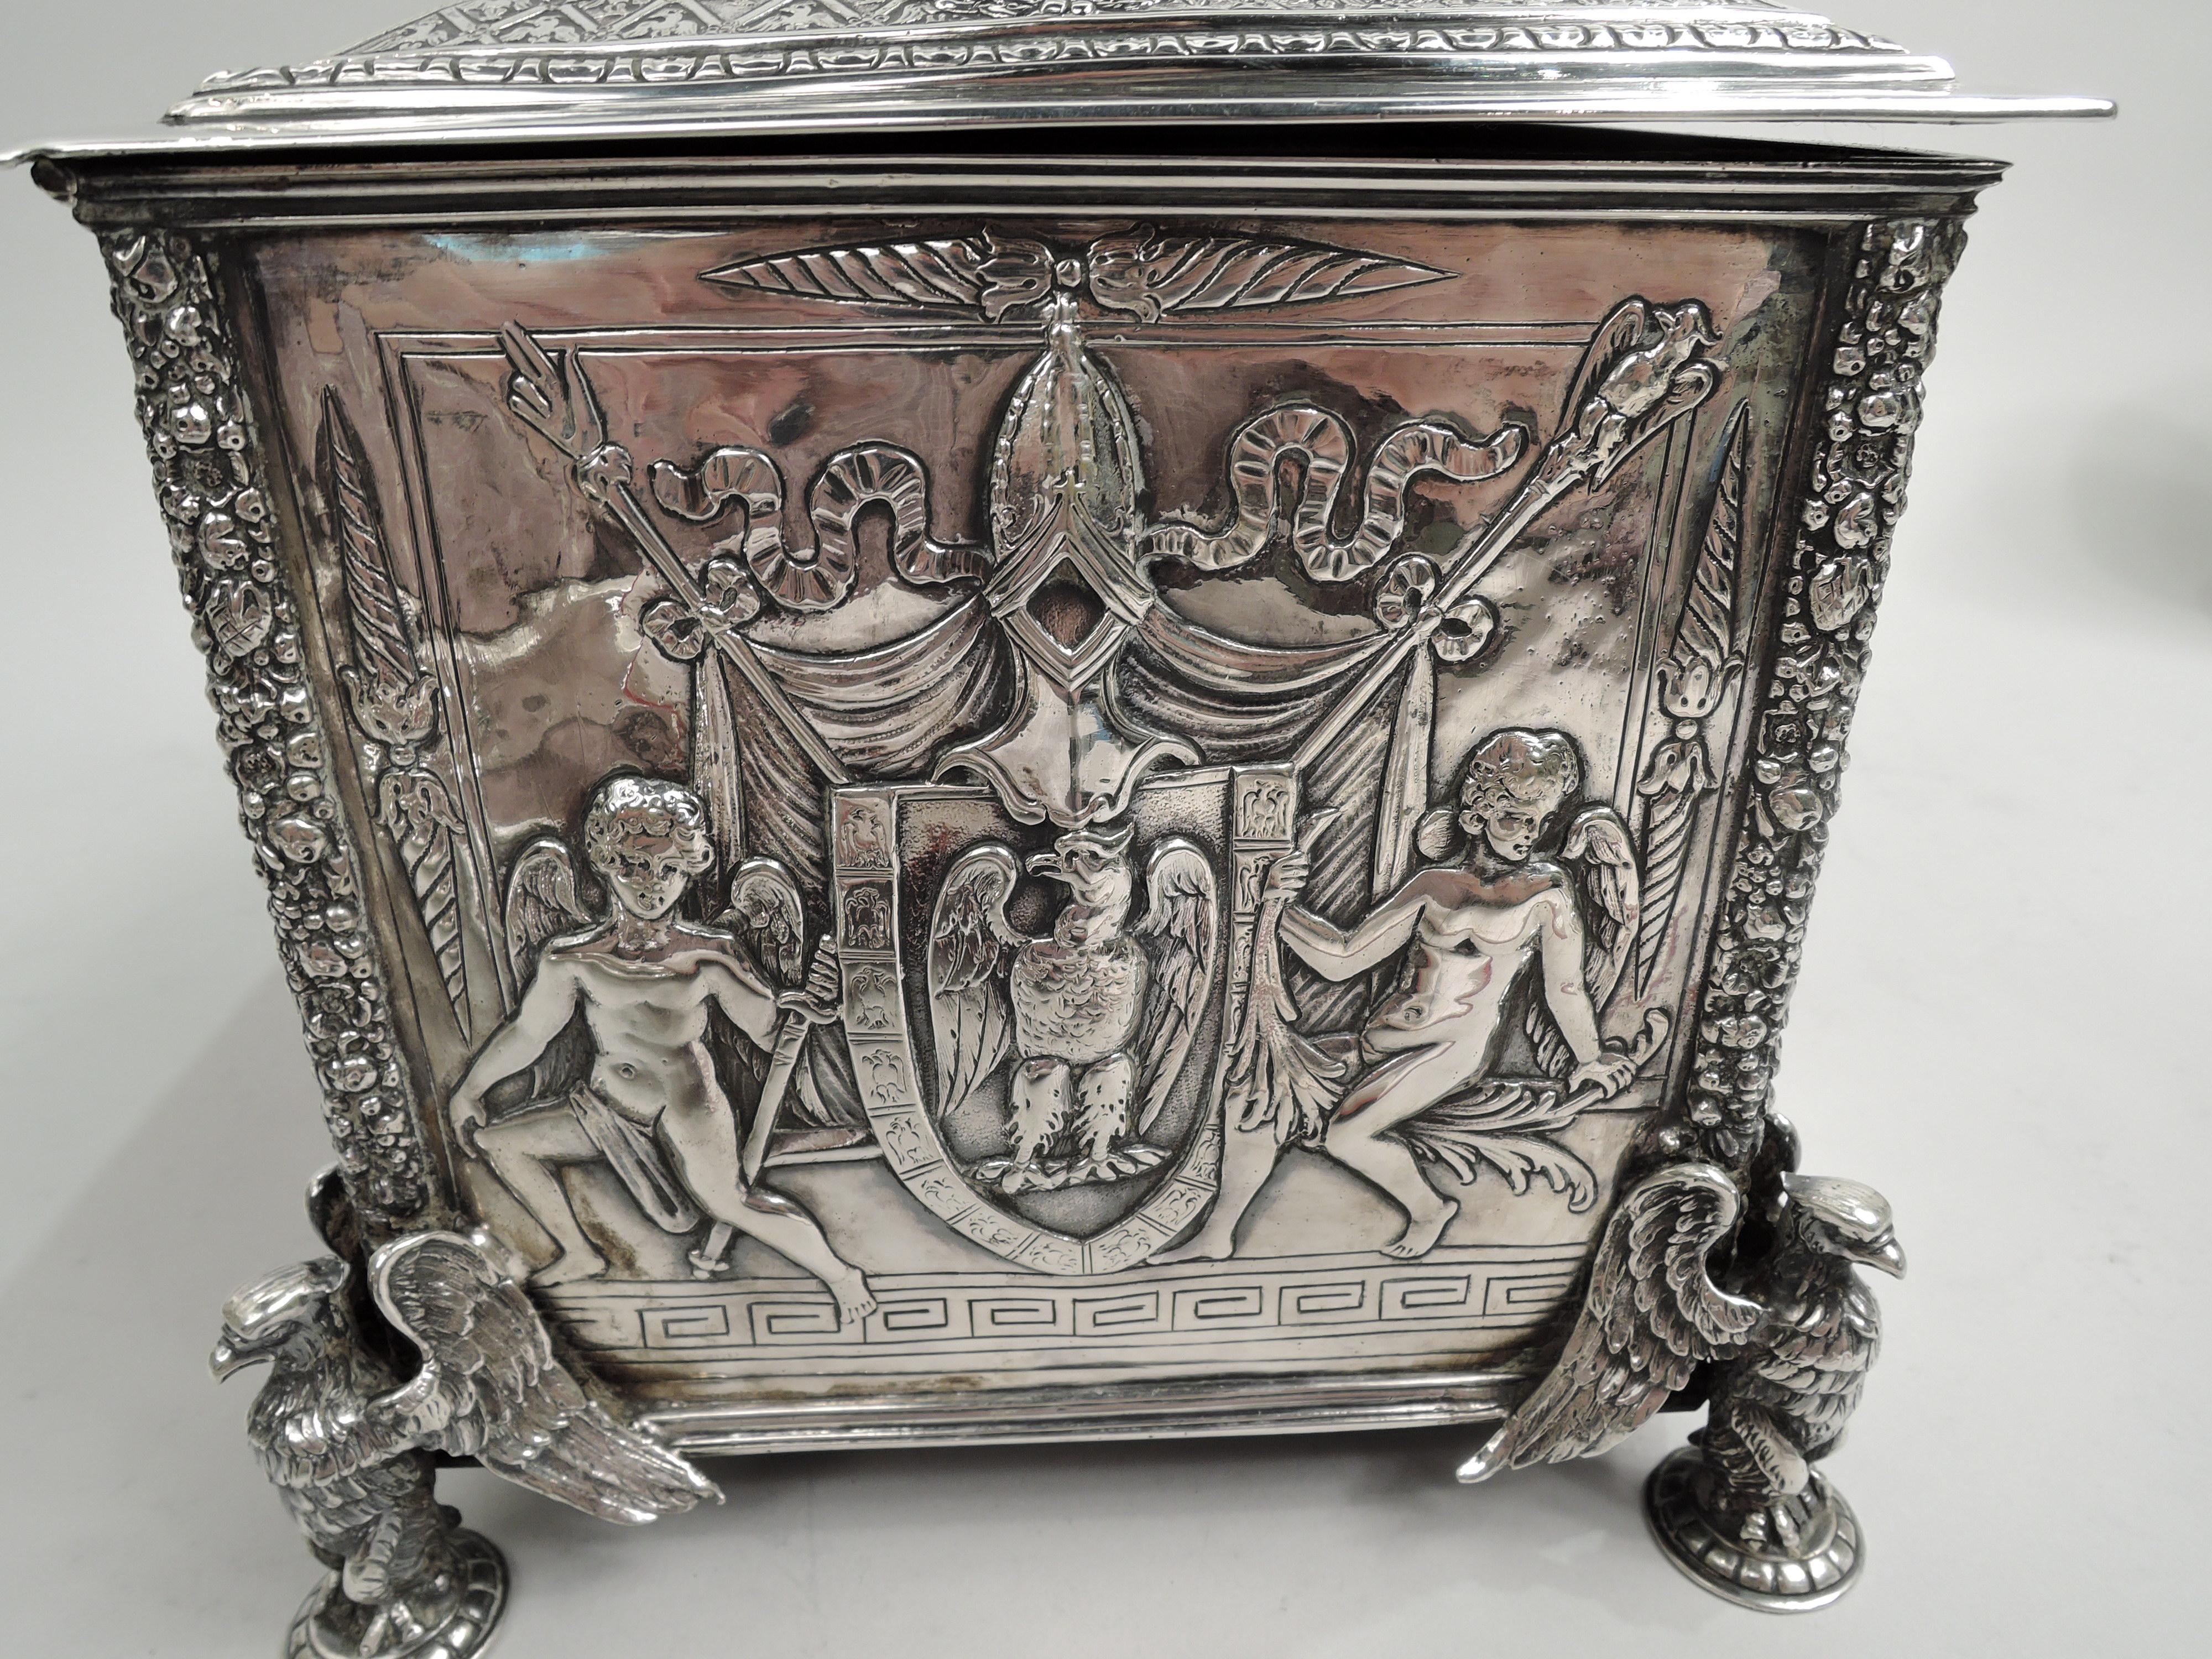 Turn-of-the-century German 800 silver box with Napoleon theme. Rectangular with cast corner-mounted eagle supports. On box front is frieze of Napoleon being offered the key to a city; on back he addresses the supplicating vanquished. Both panels